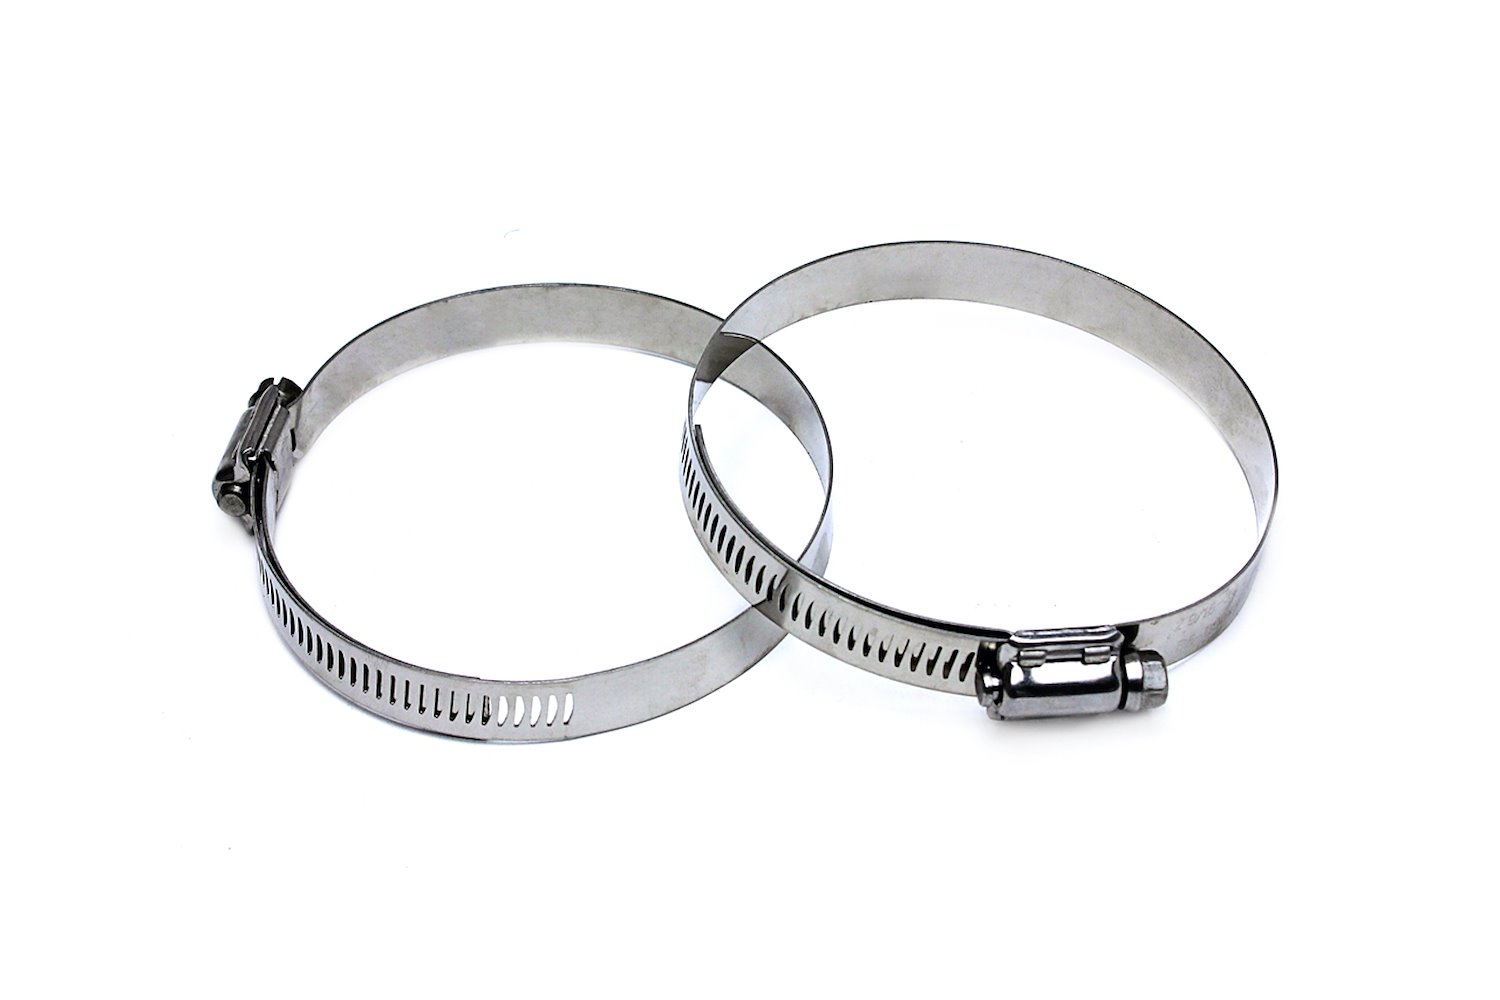 SSWC-84-108x2 Stainless Steel Worm Gear Hose Clamp, Effective Range: 3-5/16 in.- 4-1/4 in., 2Pc